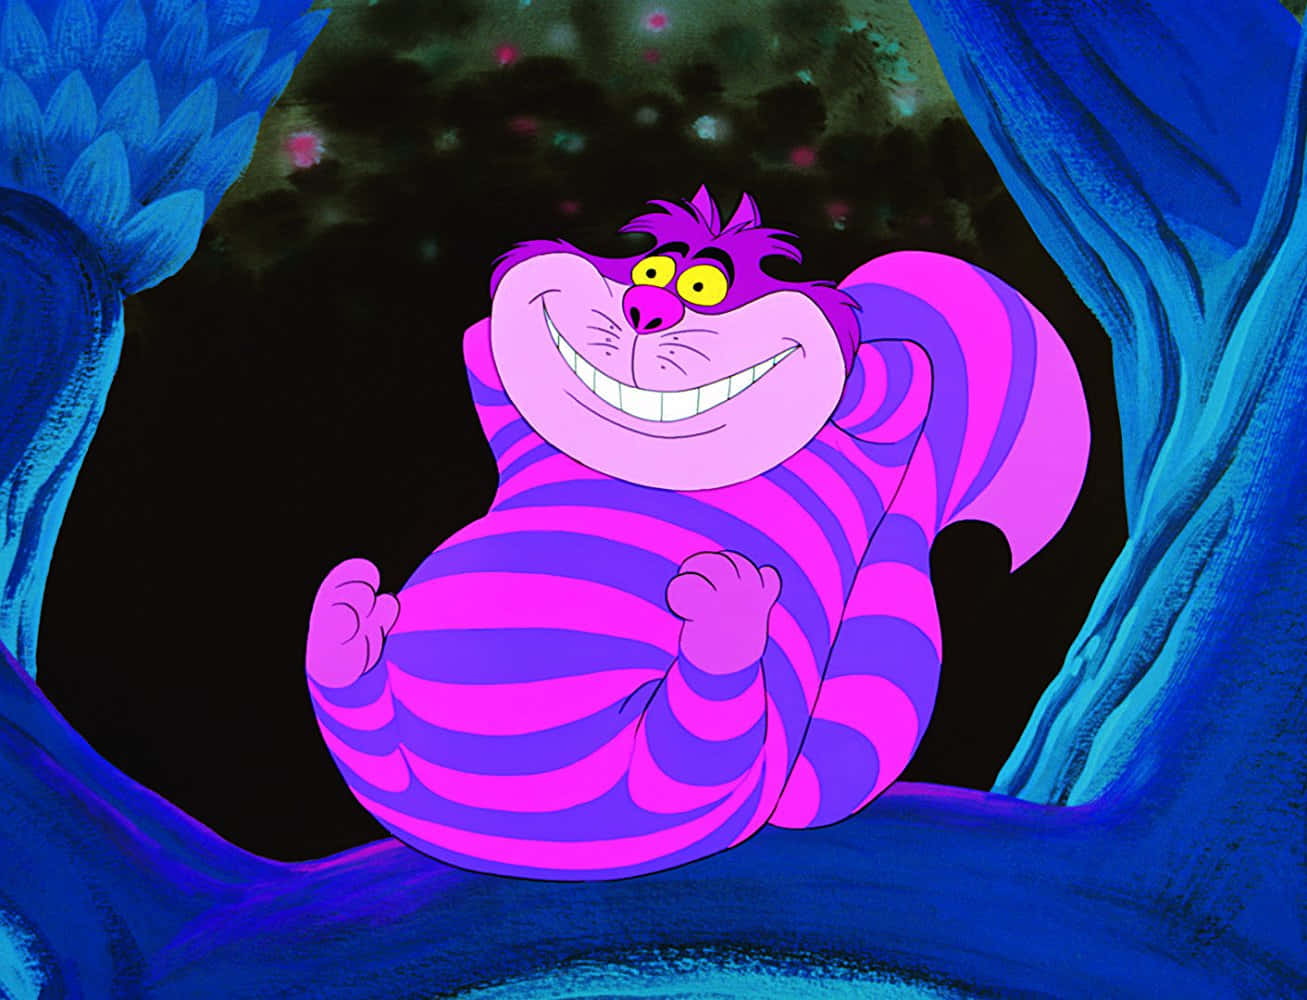 Who’s ready for an adventure with the Cheshire Cat from Alice in Wonderland?